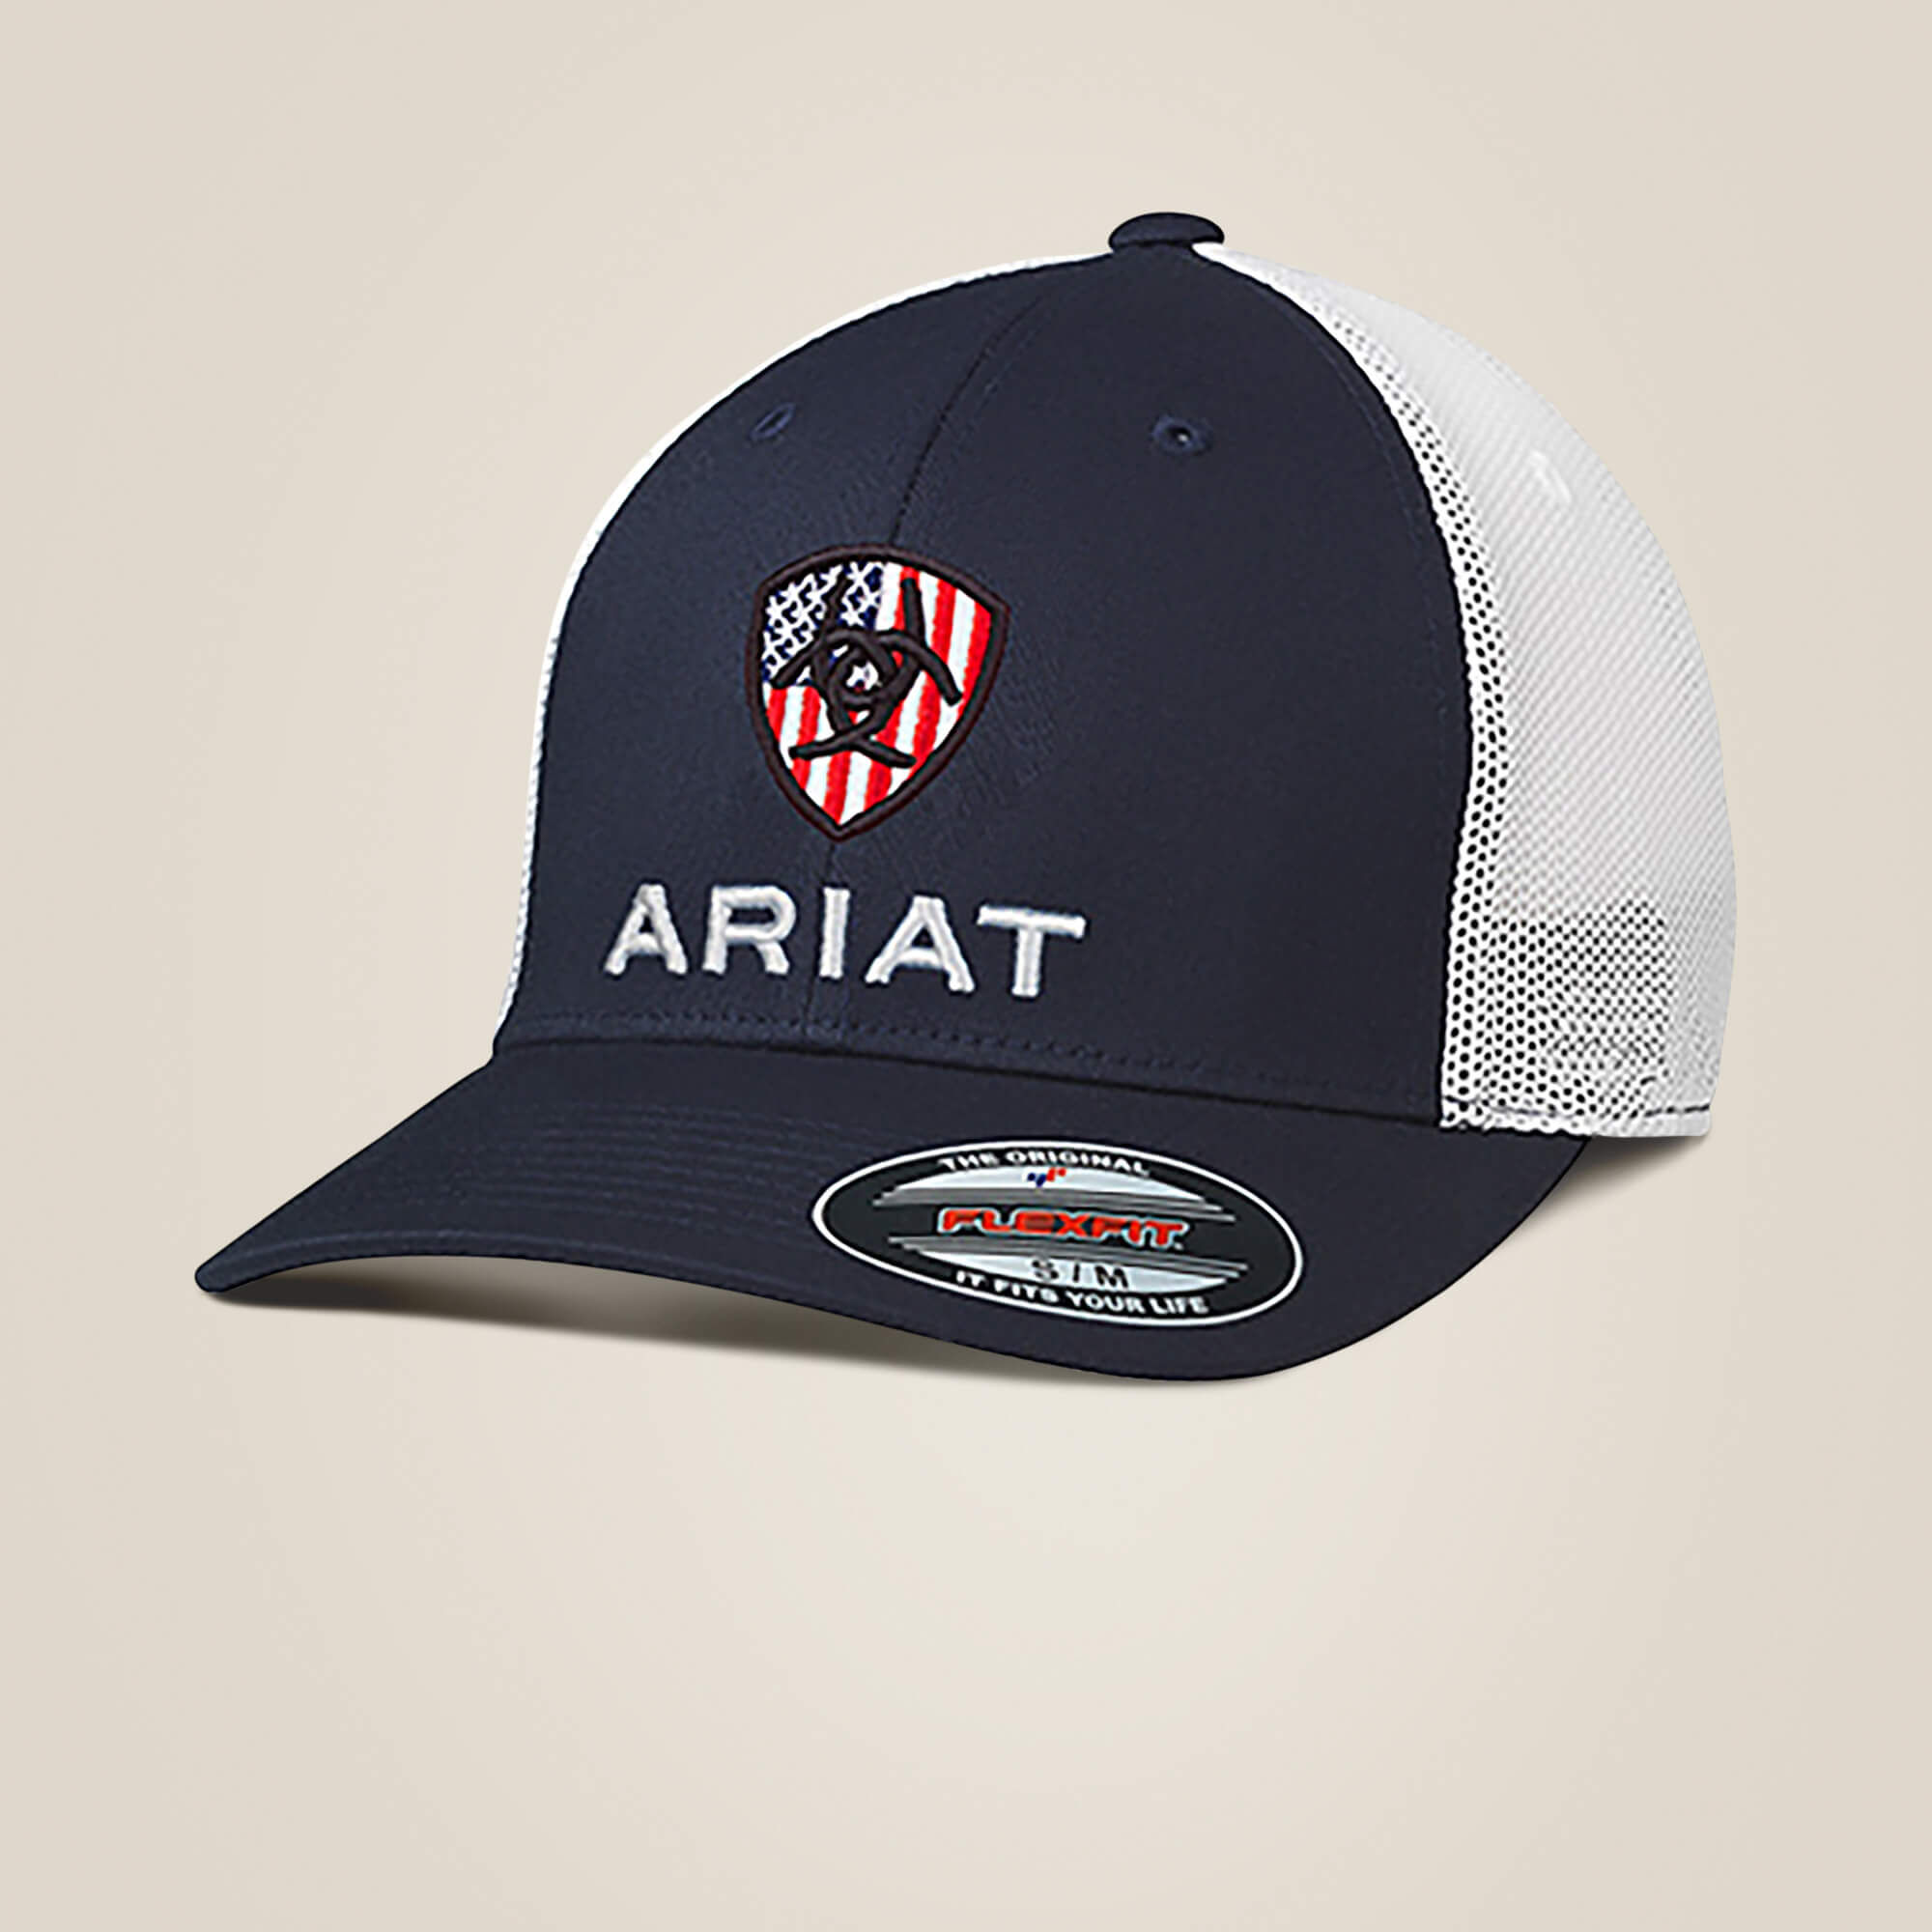 Men's Usa flag shield logo cap in Navy, Size: OS by Ariat